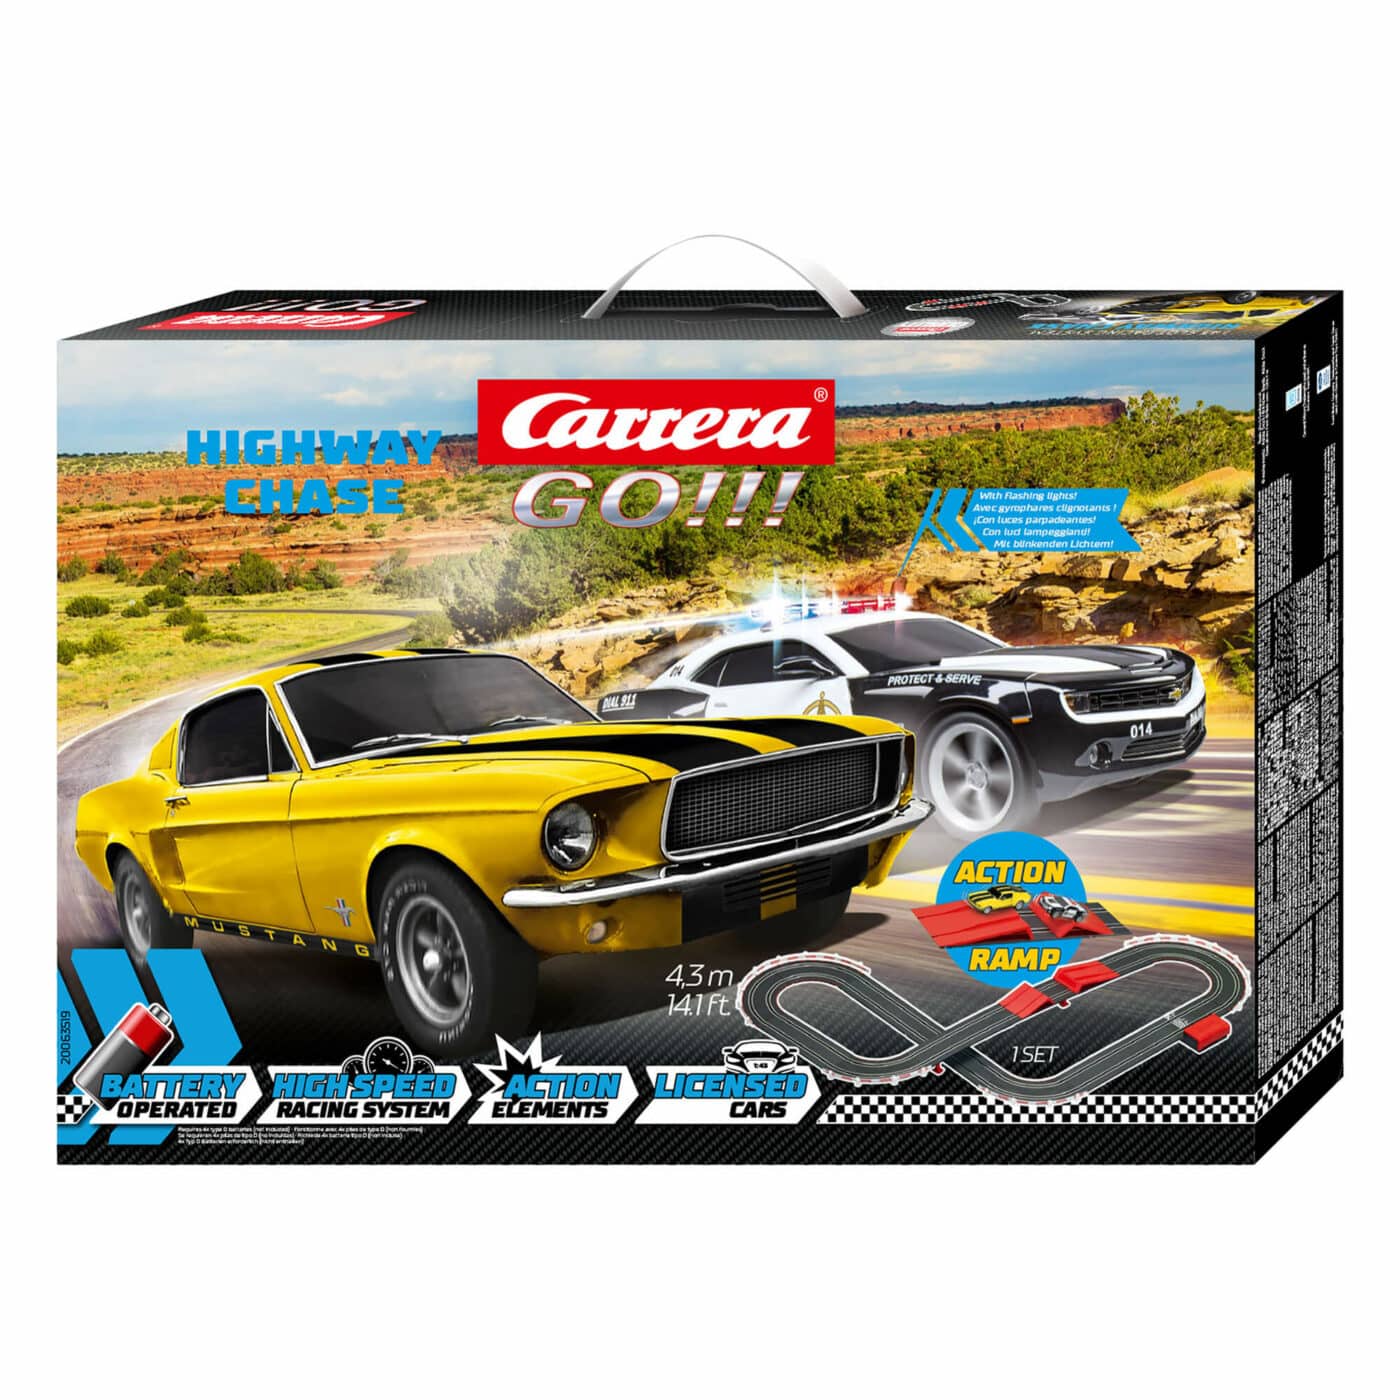 Carrera GO - Highway Chase Battery Operated Slot Car Set-1